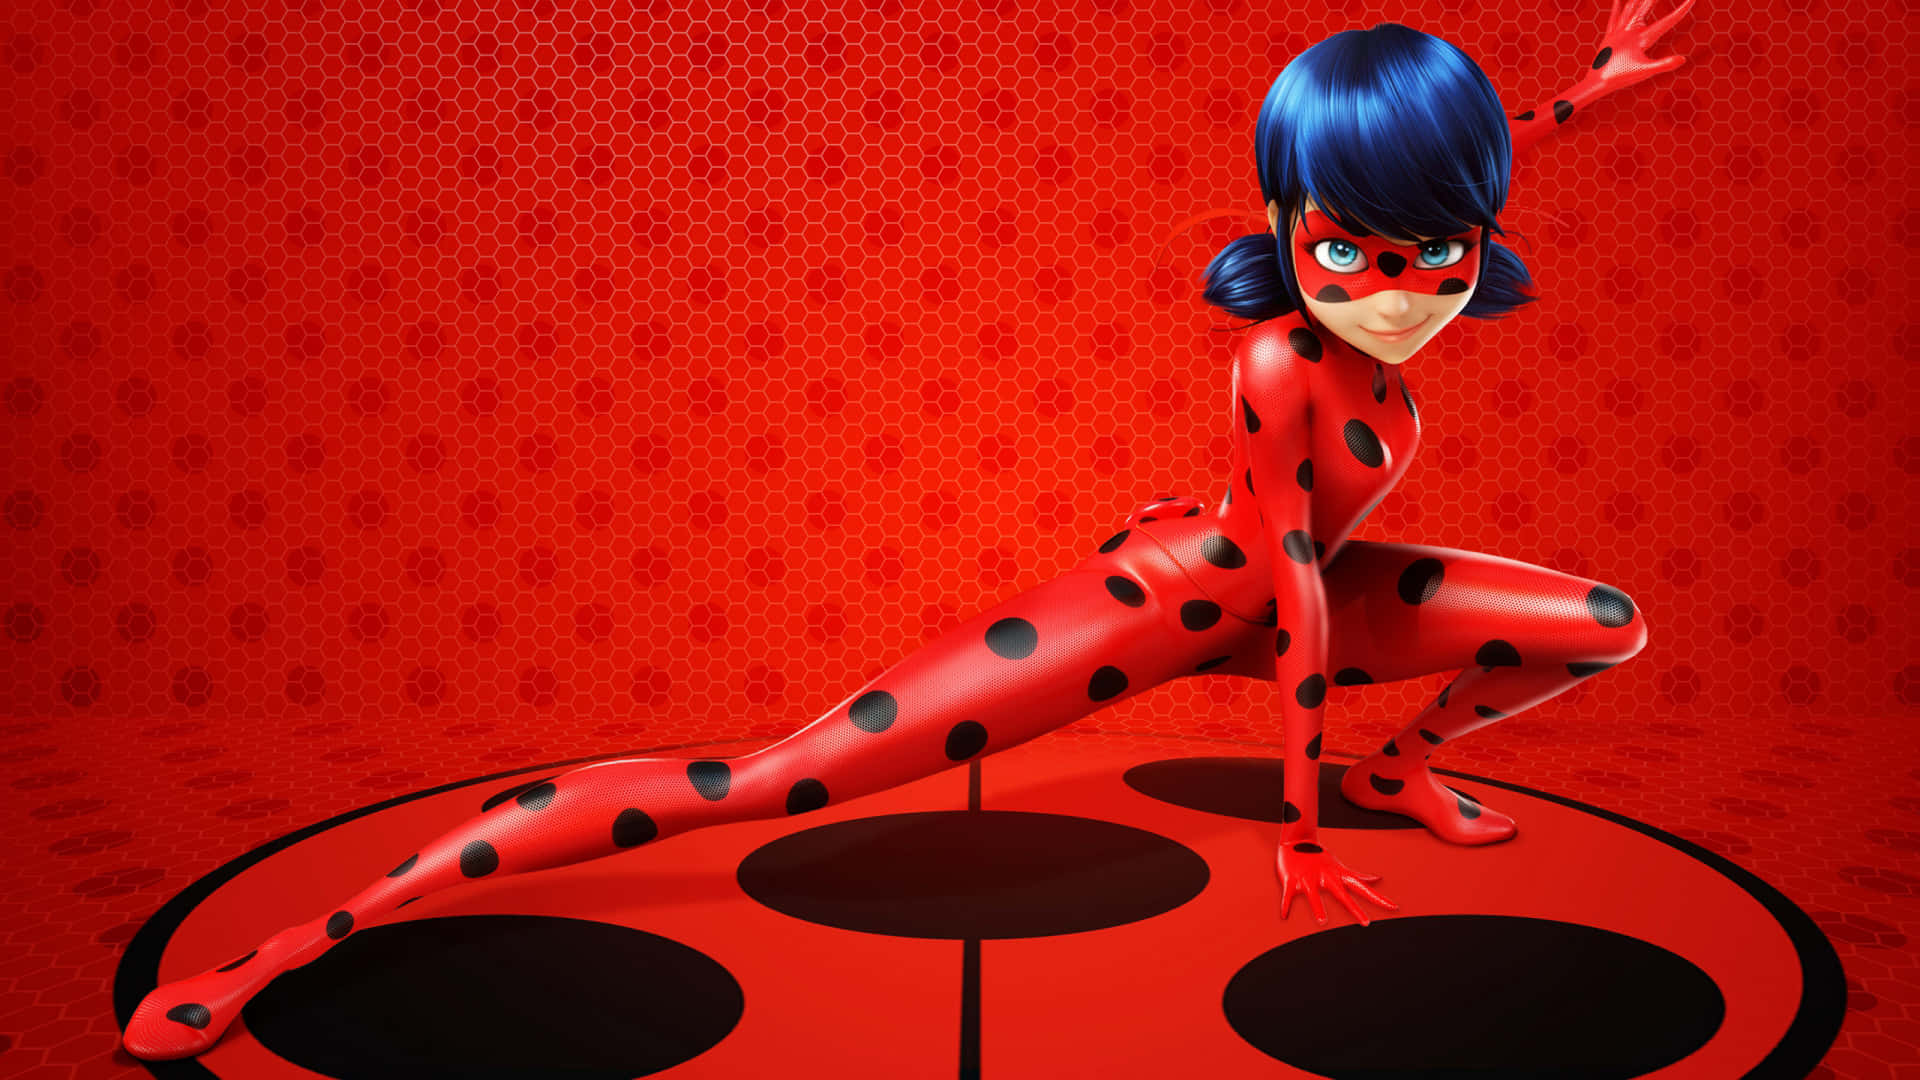 Get Ready to Fly Into Adventure with Miraculous!